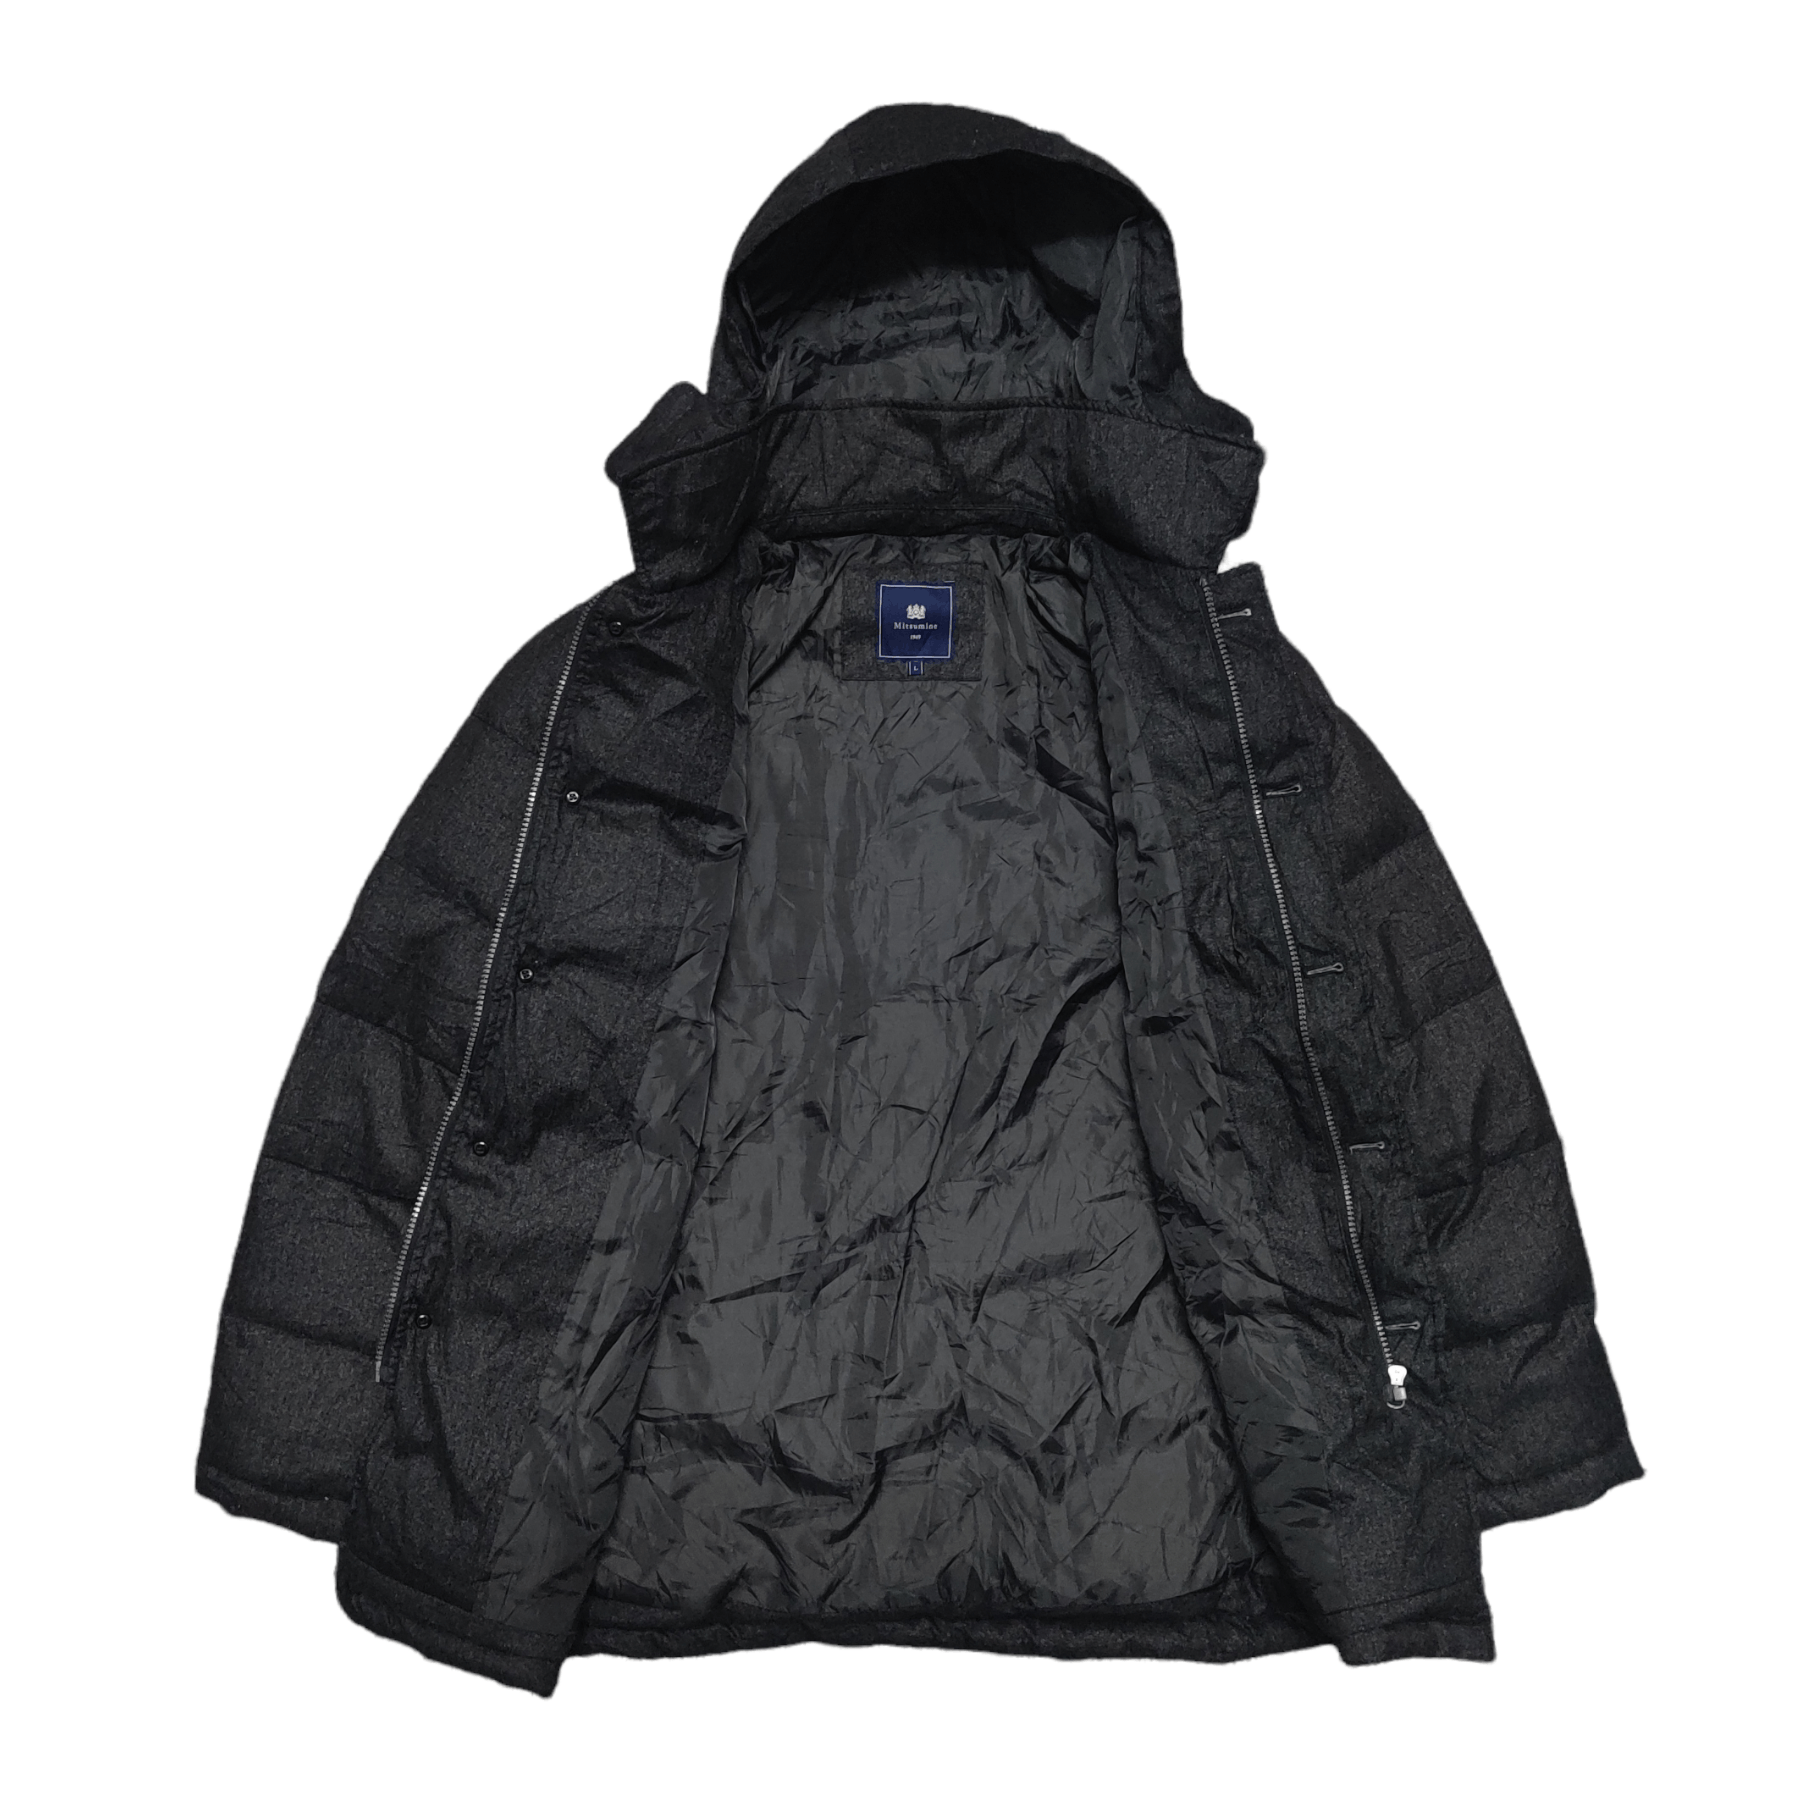 Archival Clothing - Mitsumine Puffer Down Jacket - 6